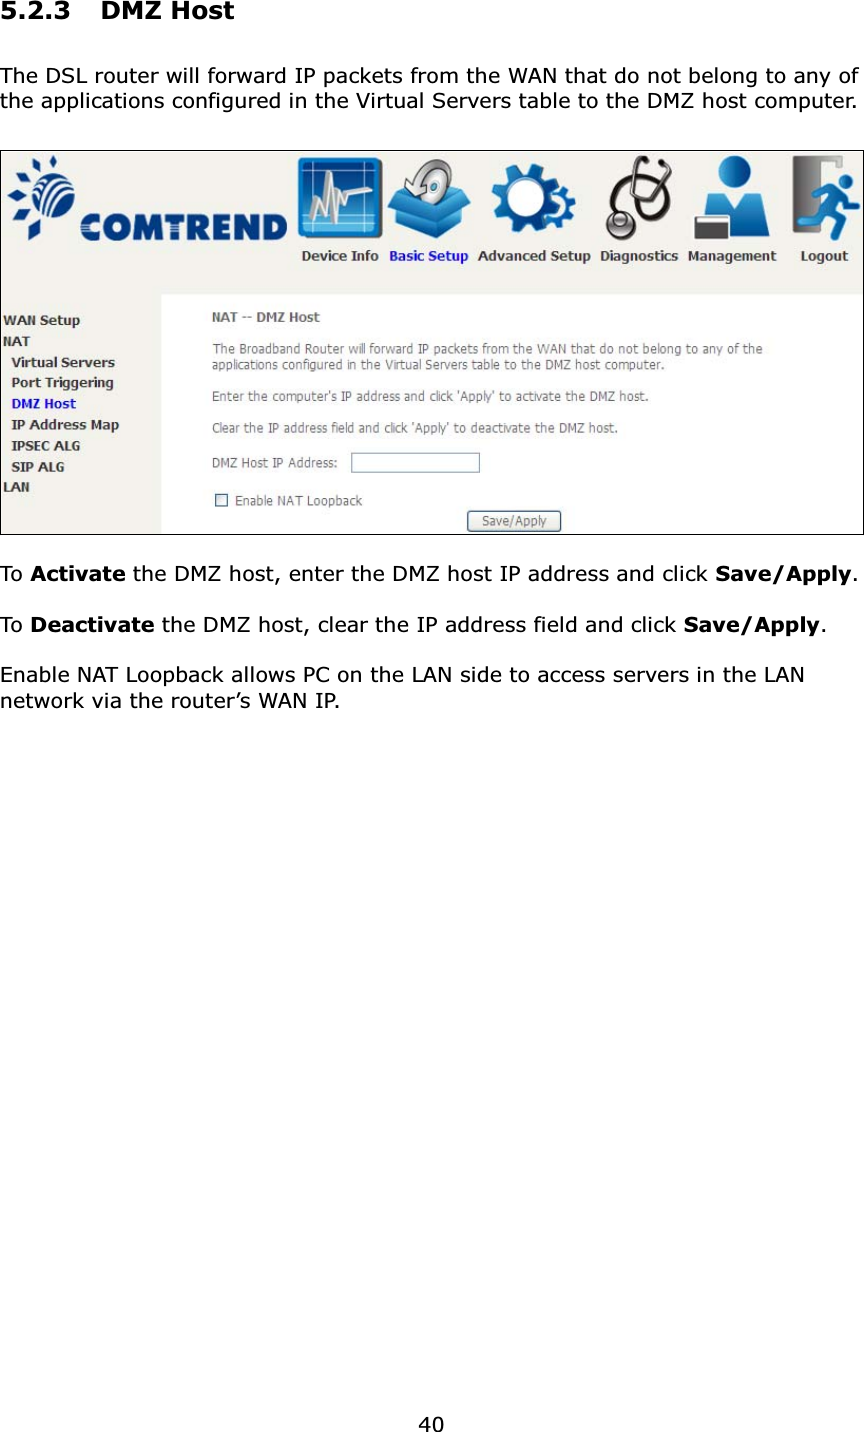 405.2.3 DMZ HostThe DSL router will forward IP packets from the WAN that do not belong to any of the applications configured in the Virtual Servers table to the DMZ host computer.To  Activate the DMZ host, enter the DMZ host IP address and click Save/Apply.To Deactivate the DMZ host, clear the IP address field and click Save/Apply.Enable NAT Loopback allows PC on the LAN side to access servers in the LAN network via the router’s WAN IP.